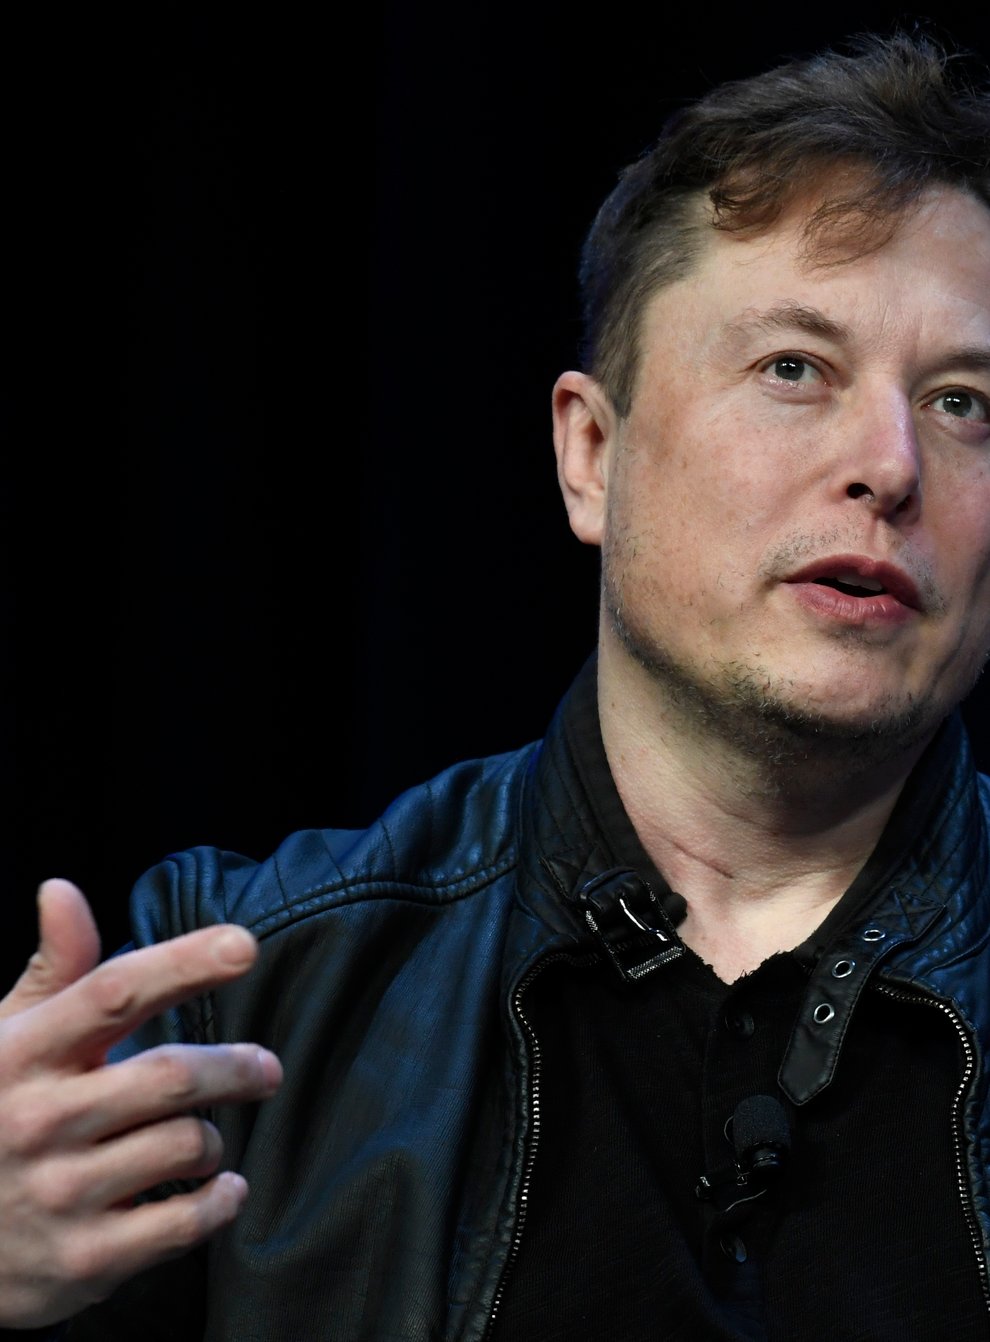 Tesla and SpaceX chief executive Elon Musk Mr Musk said he he has lined up 46.5 billion dollars (£36.2 billion) in financing to buy Twitter, putting pressure on the company’s board to negotiate a deal (Susan Walsh/AP)